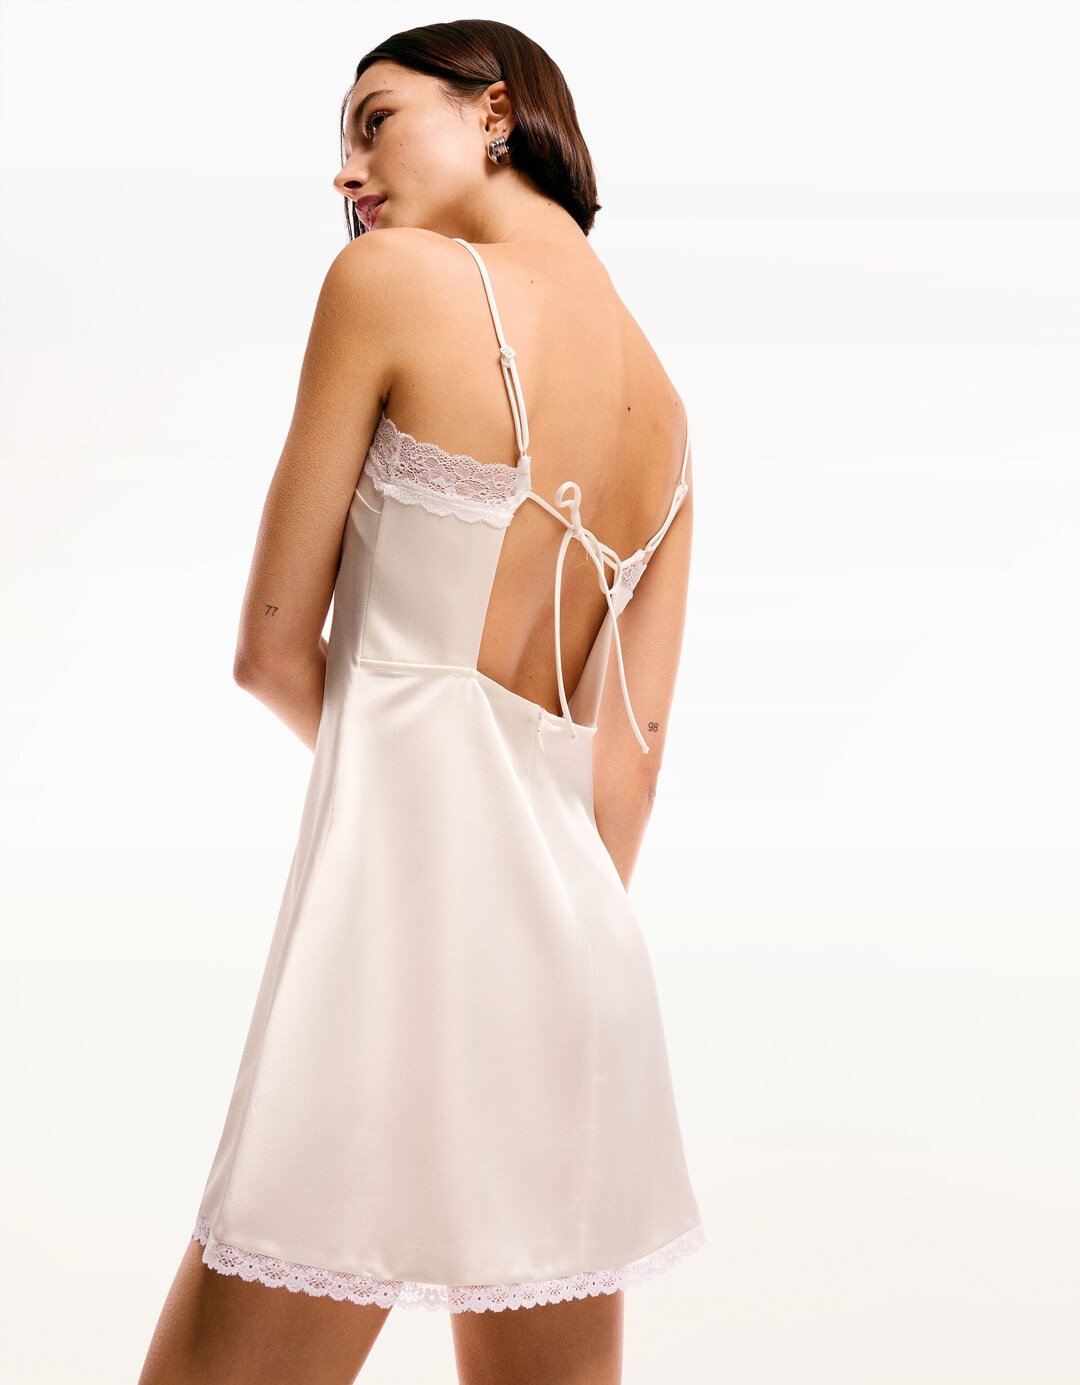 Strappy satin mini dress with blonde lace details